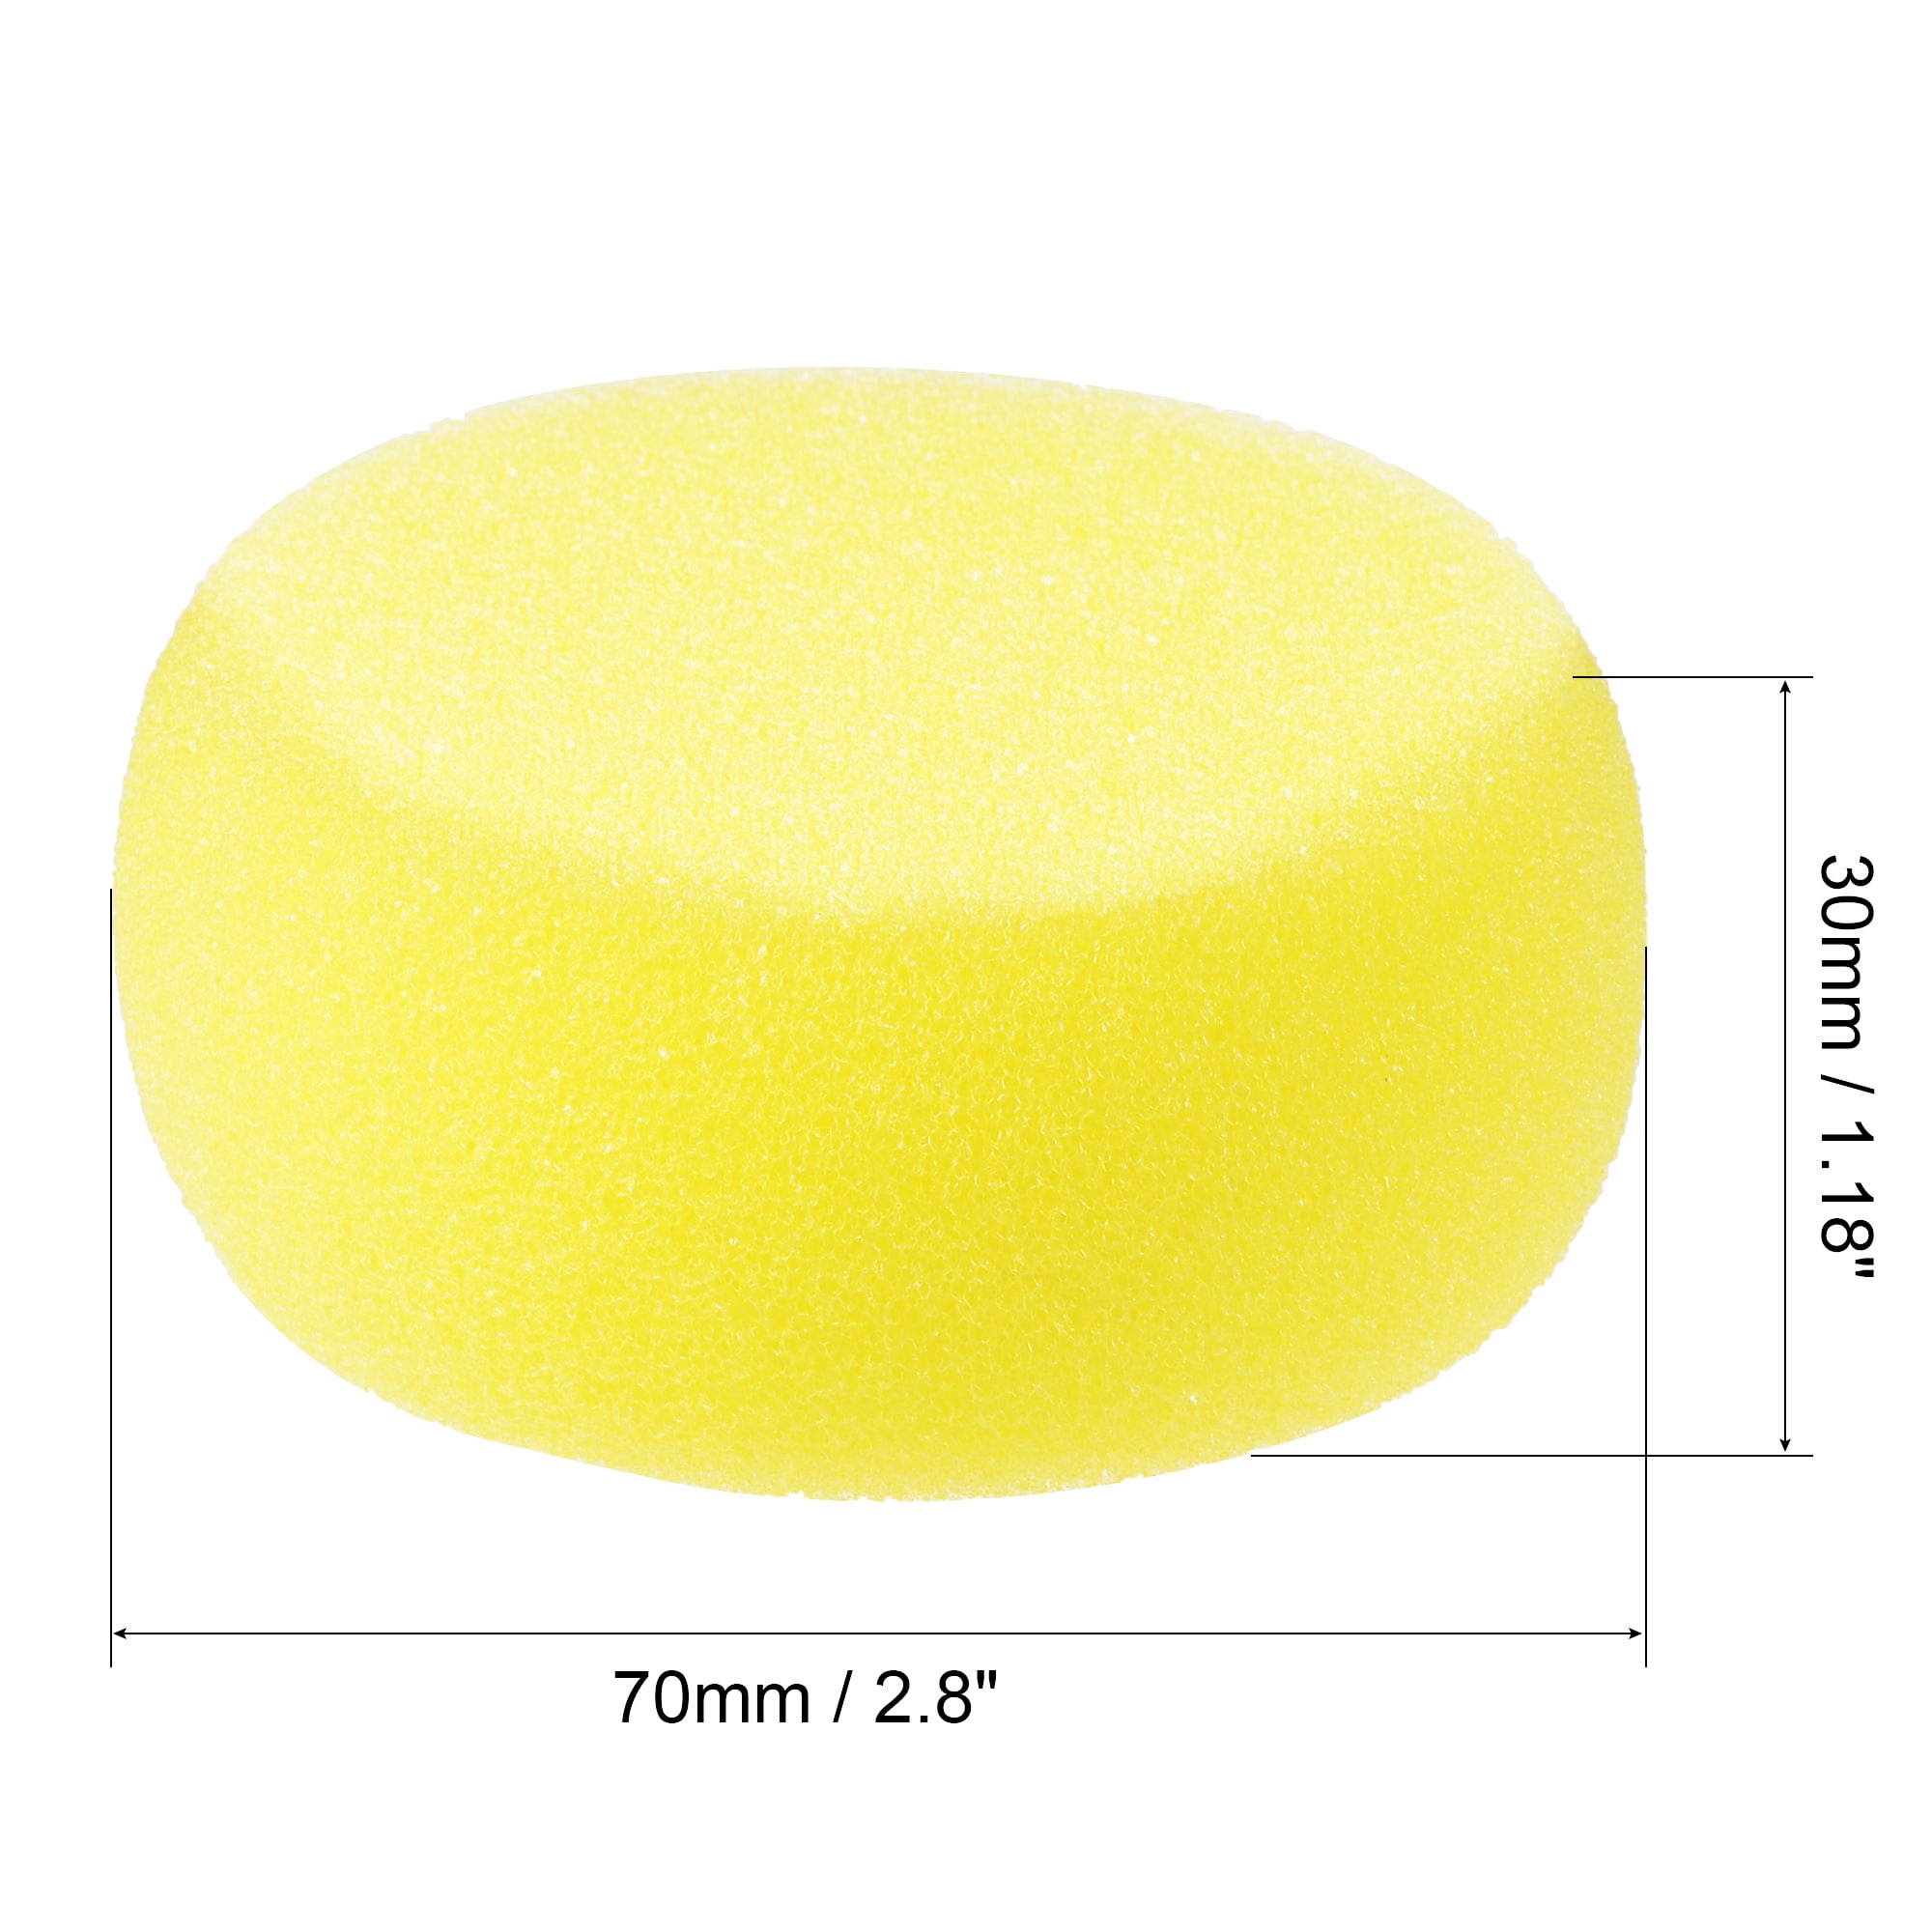  Knockdown Texture Sponge, 3 Pack Drywall Texture Patch